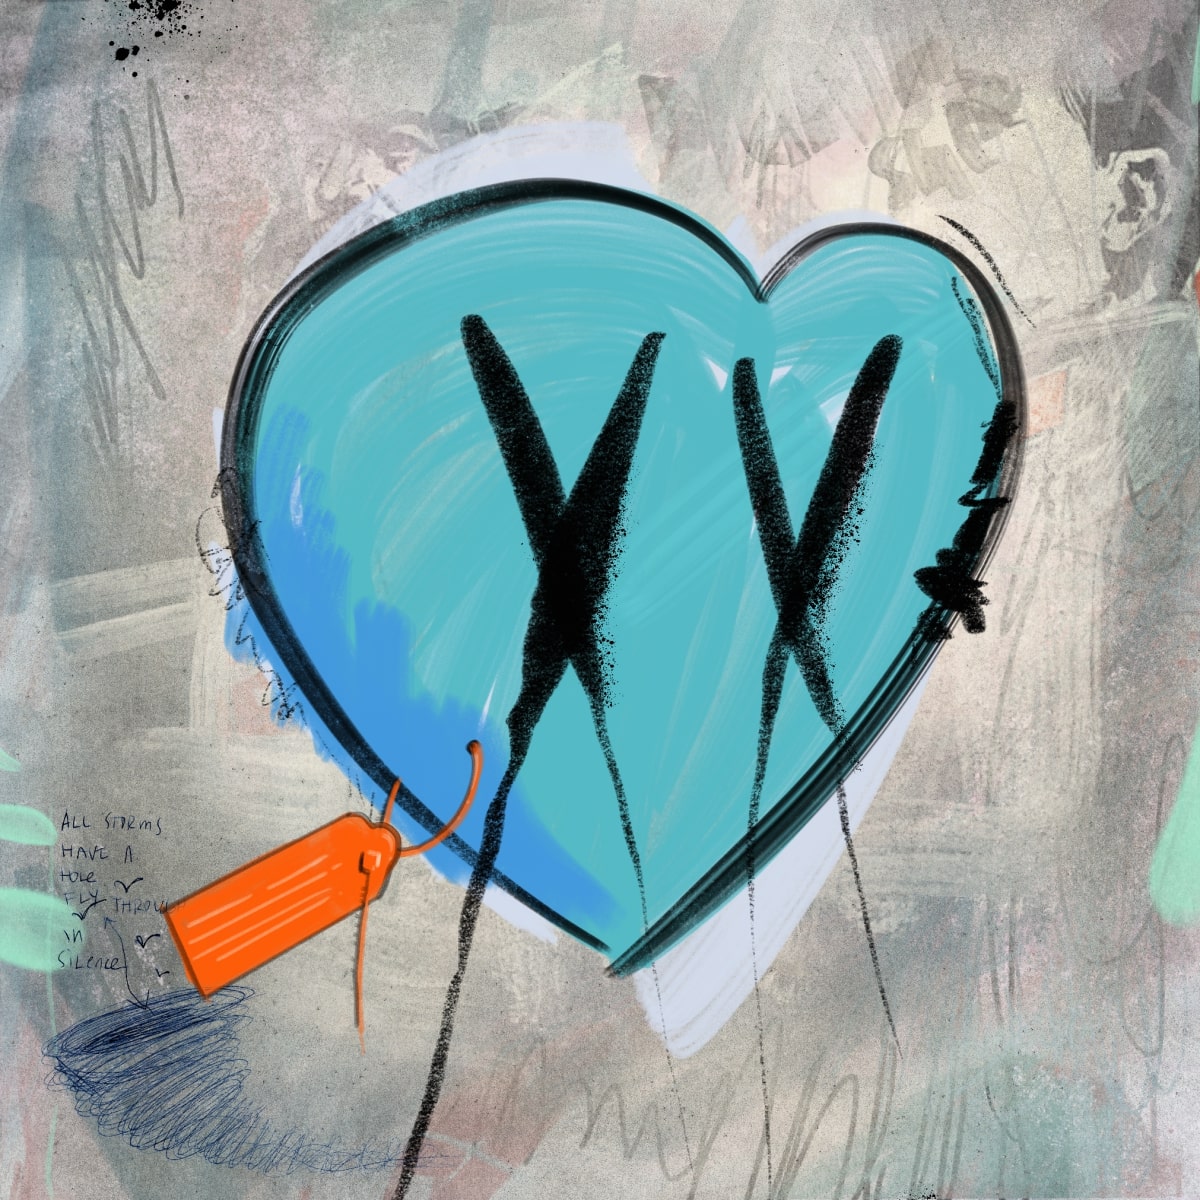 A digital image of a graffiti-style blue heart with crosses for eyes